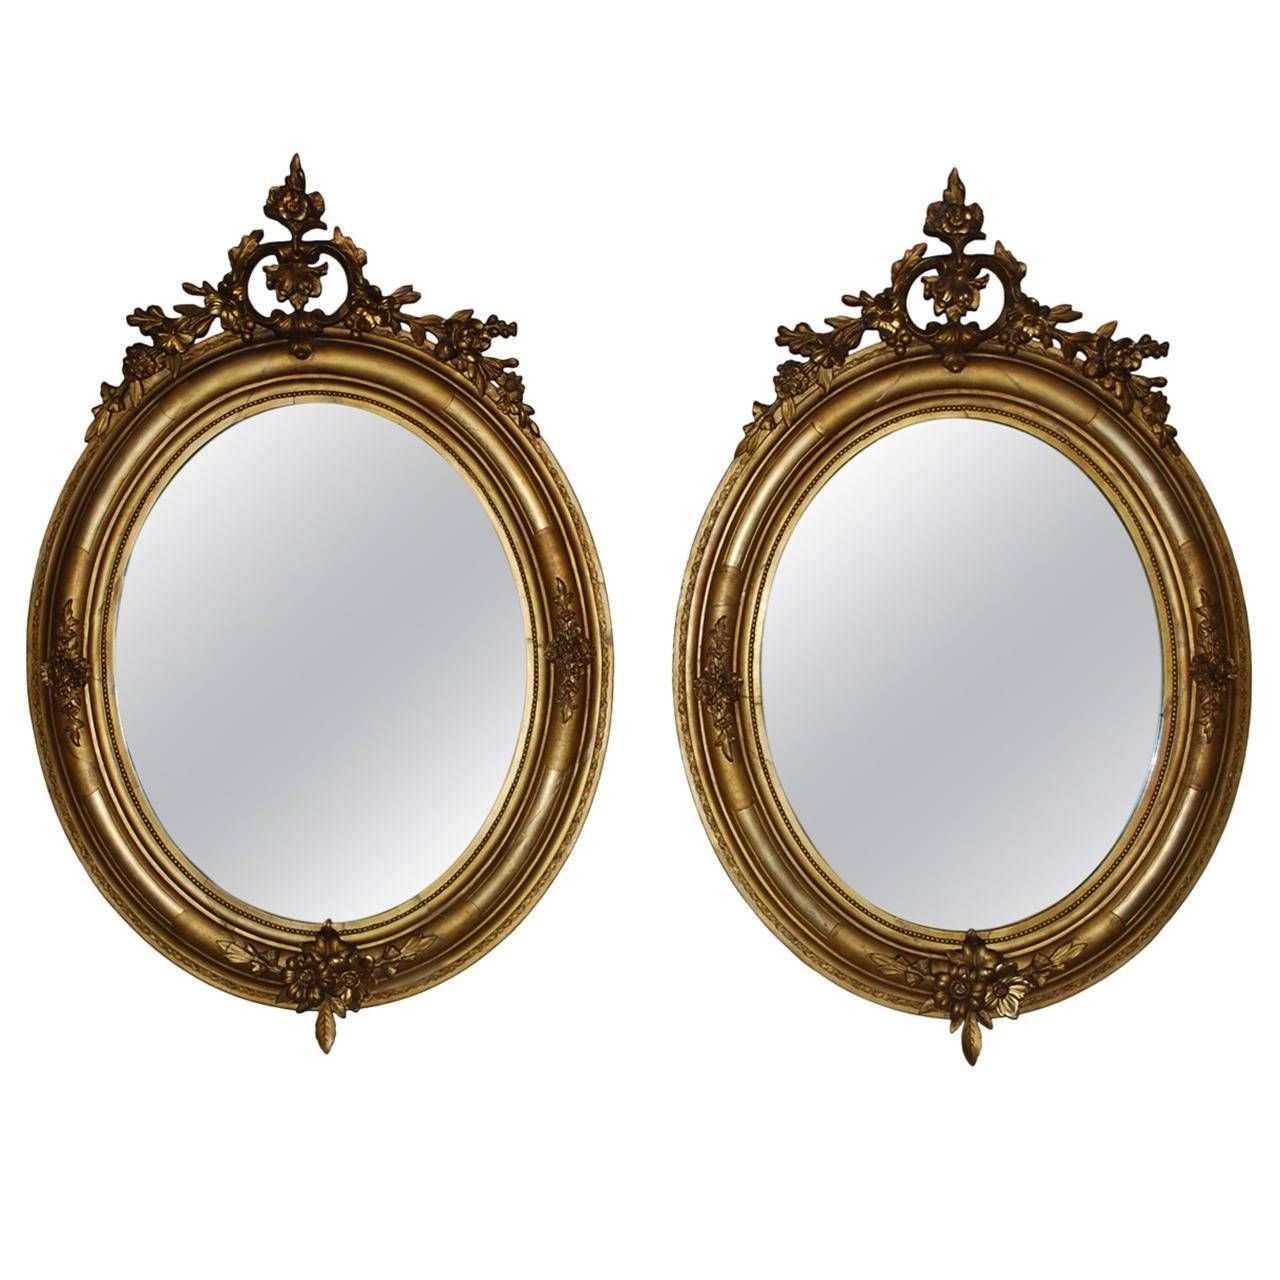 19th Century Pair Of Gold Gilded Oval Mirrors At 1stdibs Pertaining To Gilded Mirrors (View 21 of 25)